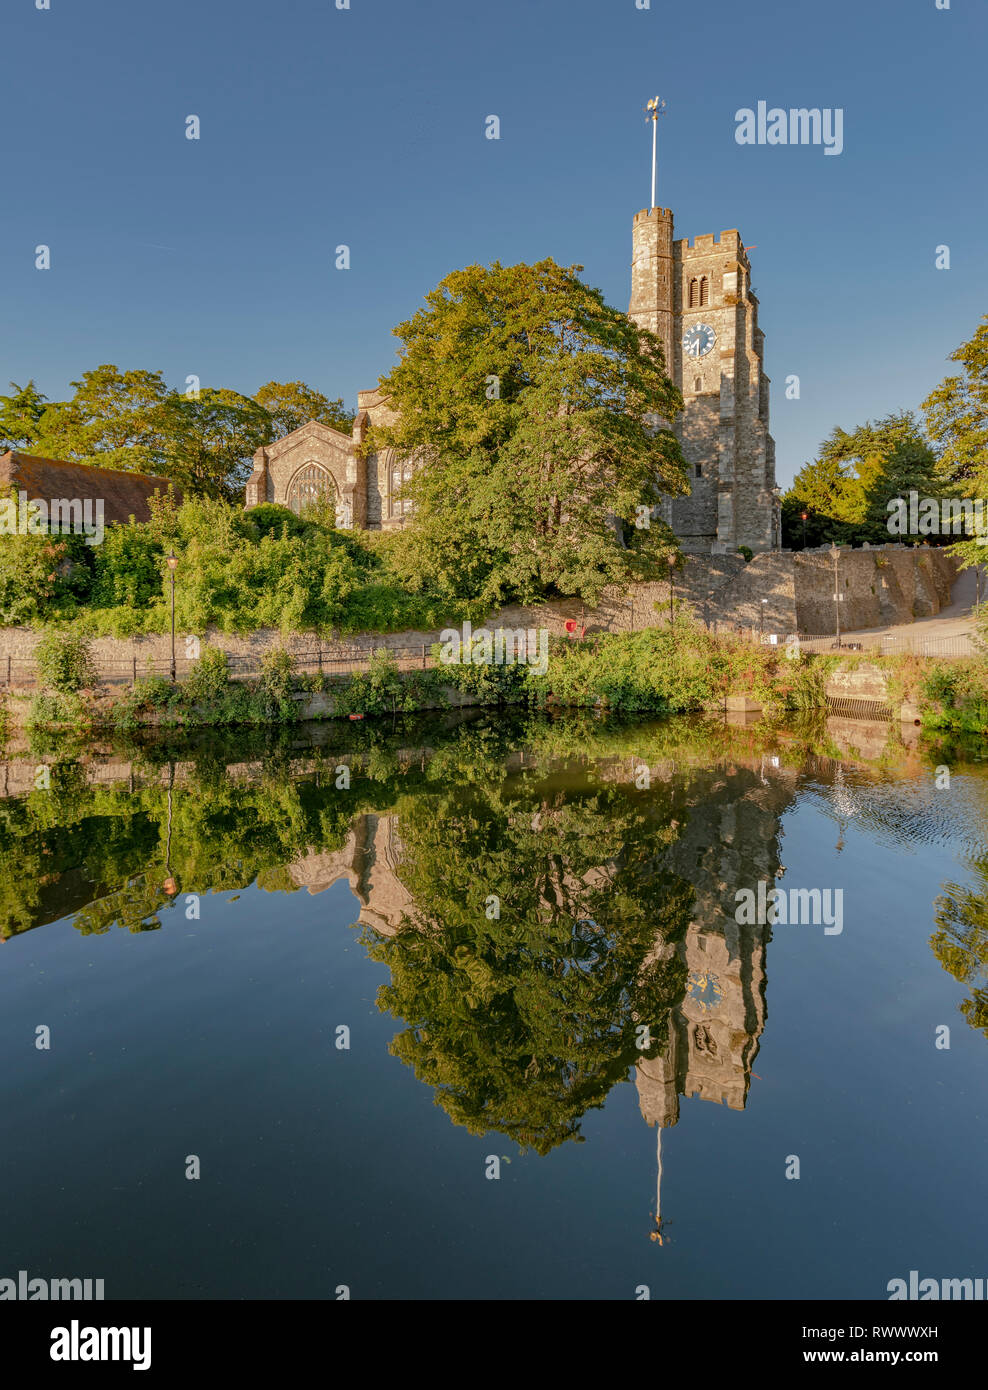 Views of The bishops palace and other notable buildings, Maidstone, kent reflected in the water to give near perfect symmetry. Blue sky, still water Stock Photo